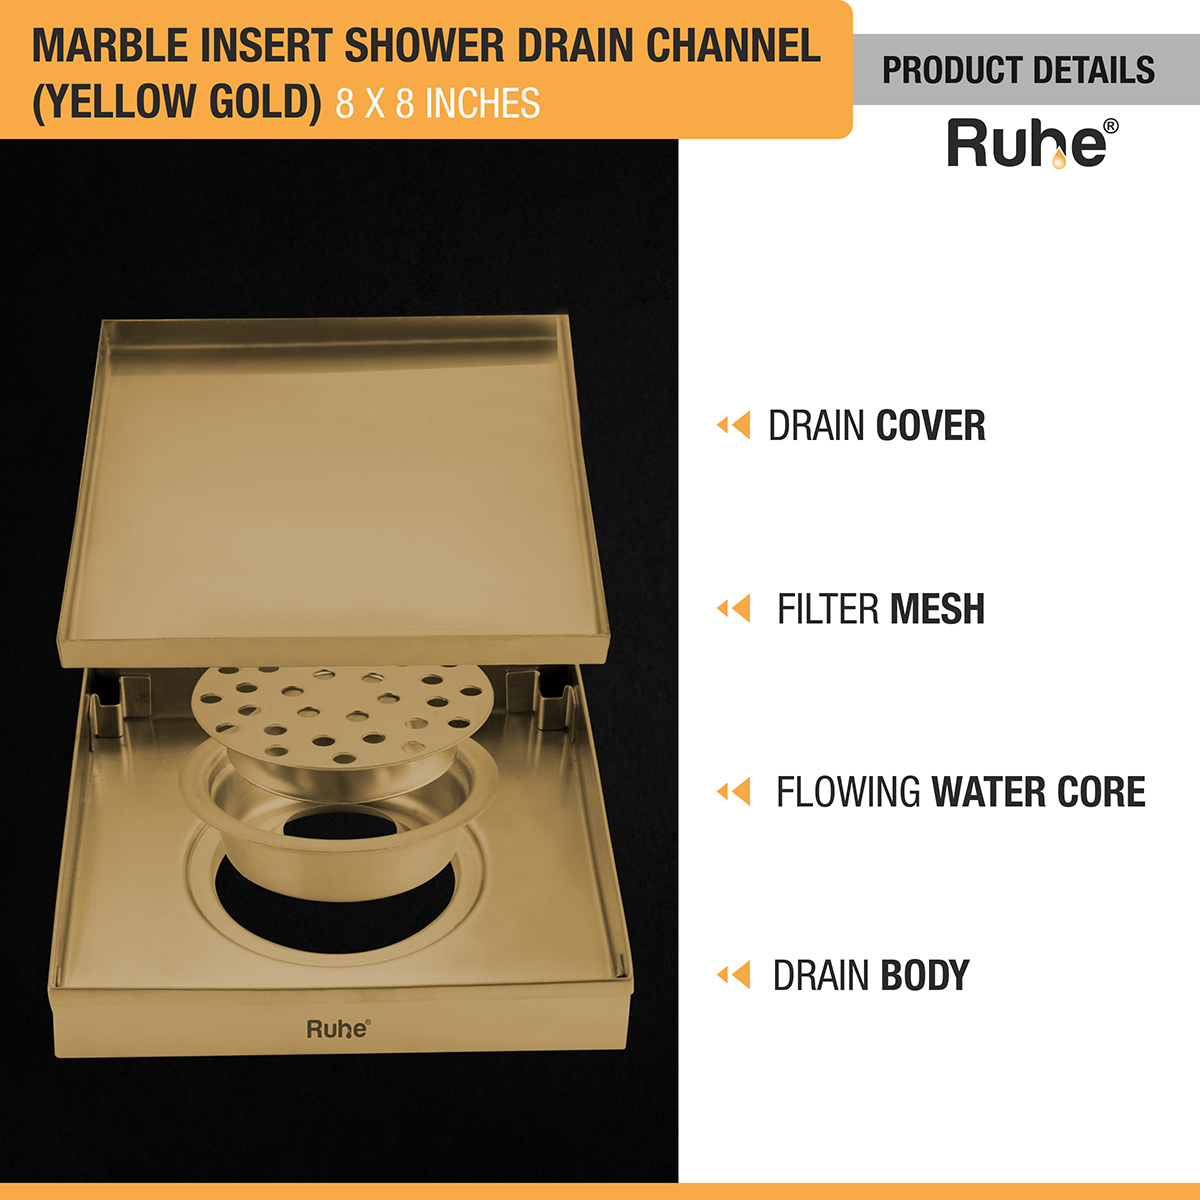 Marble Insert Shower Drain Channel (8 x 8 Inches) YELLOW GOLD PVD Coated with drain cover, filter mesh, drain body